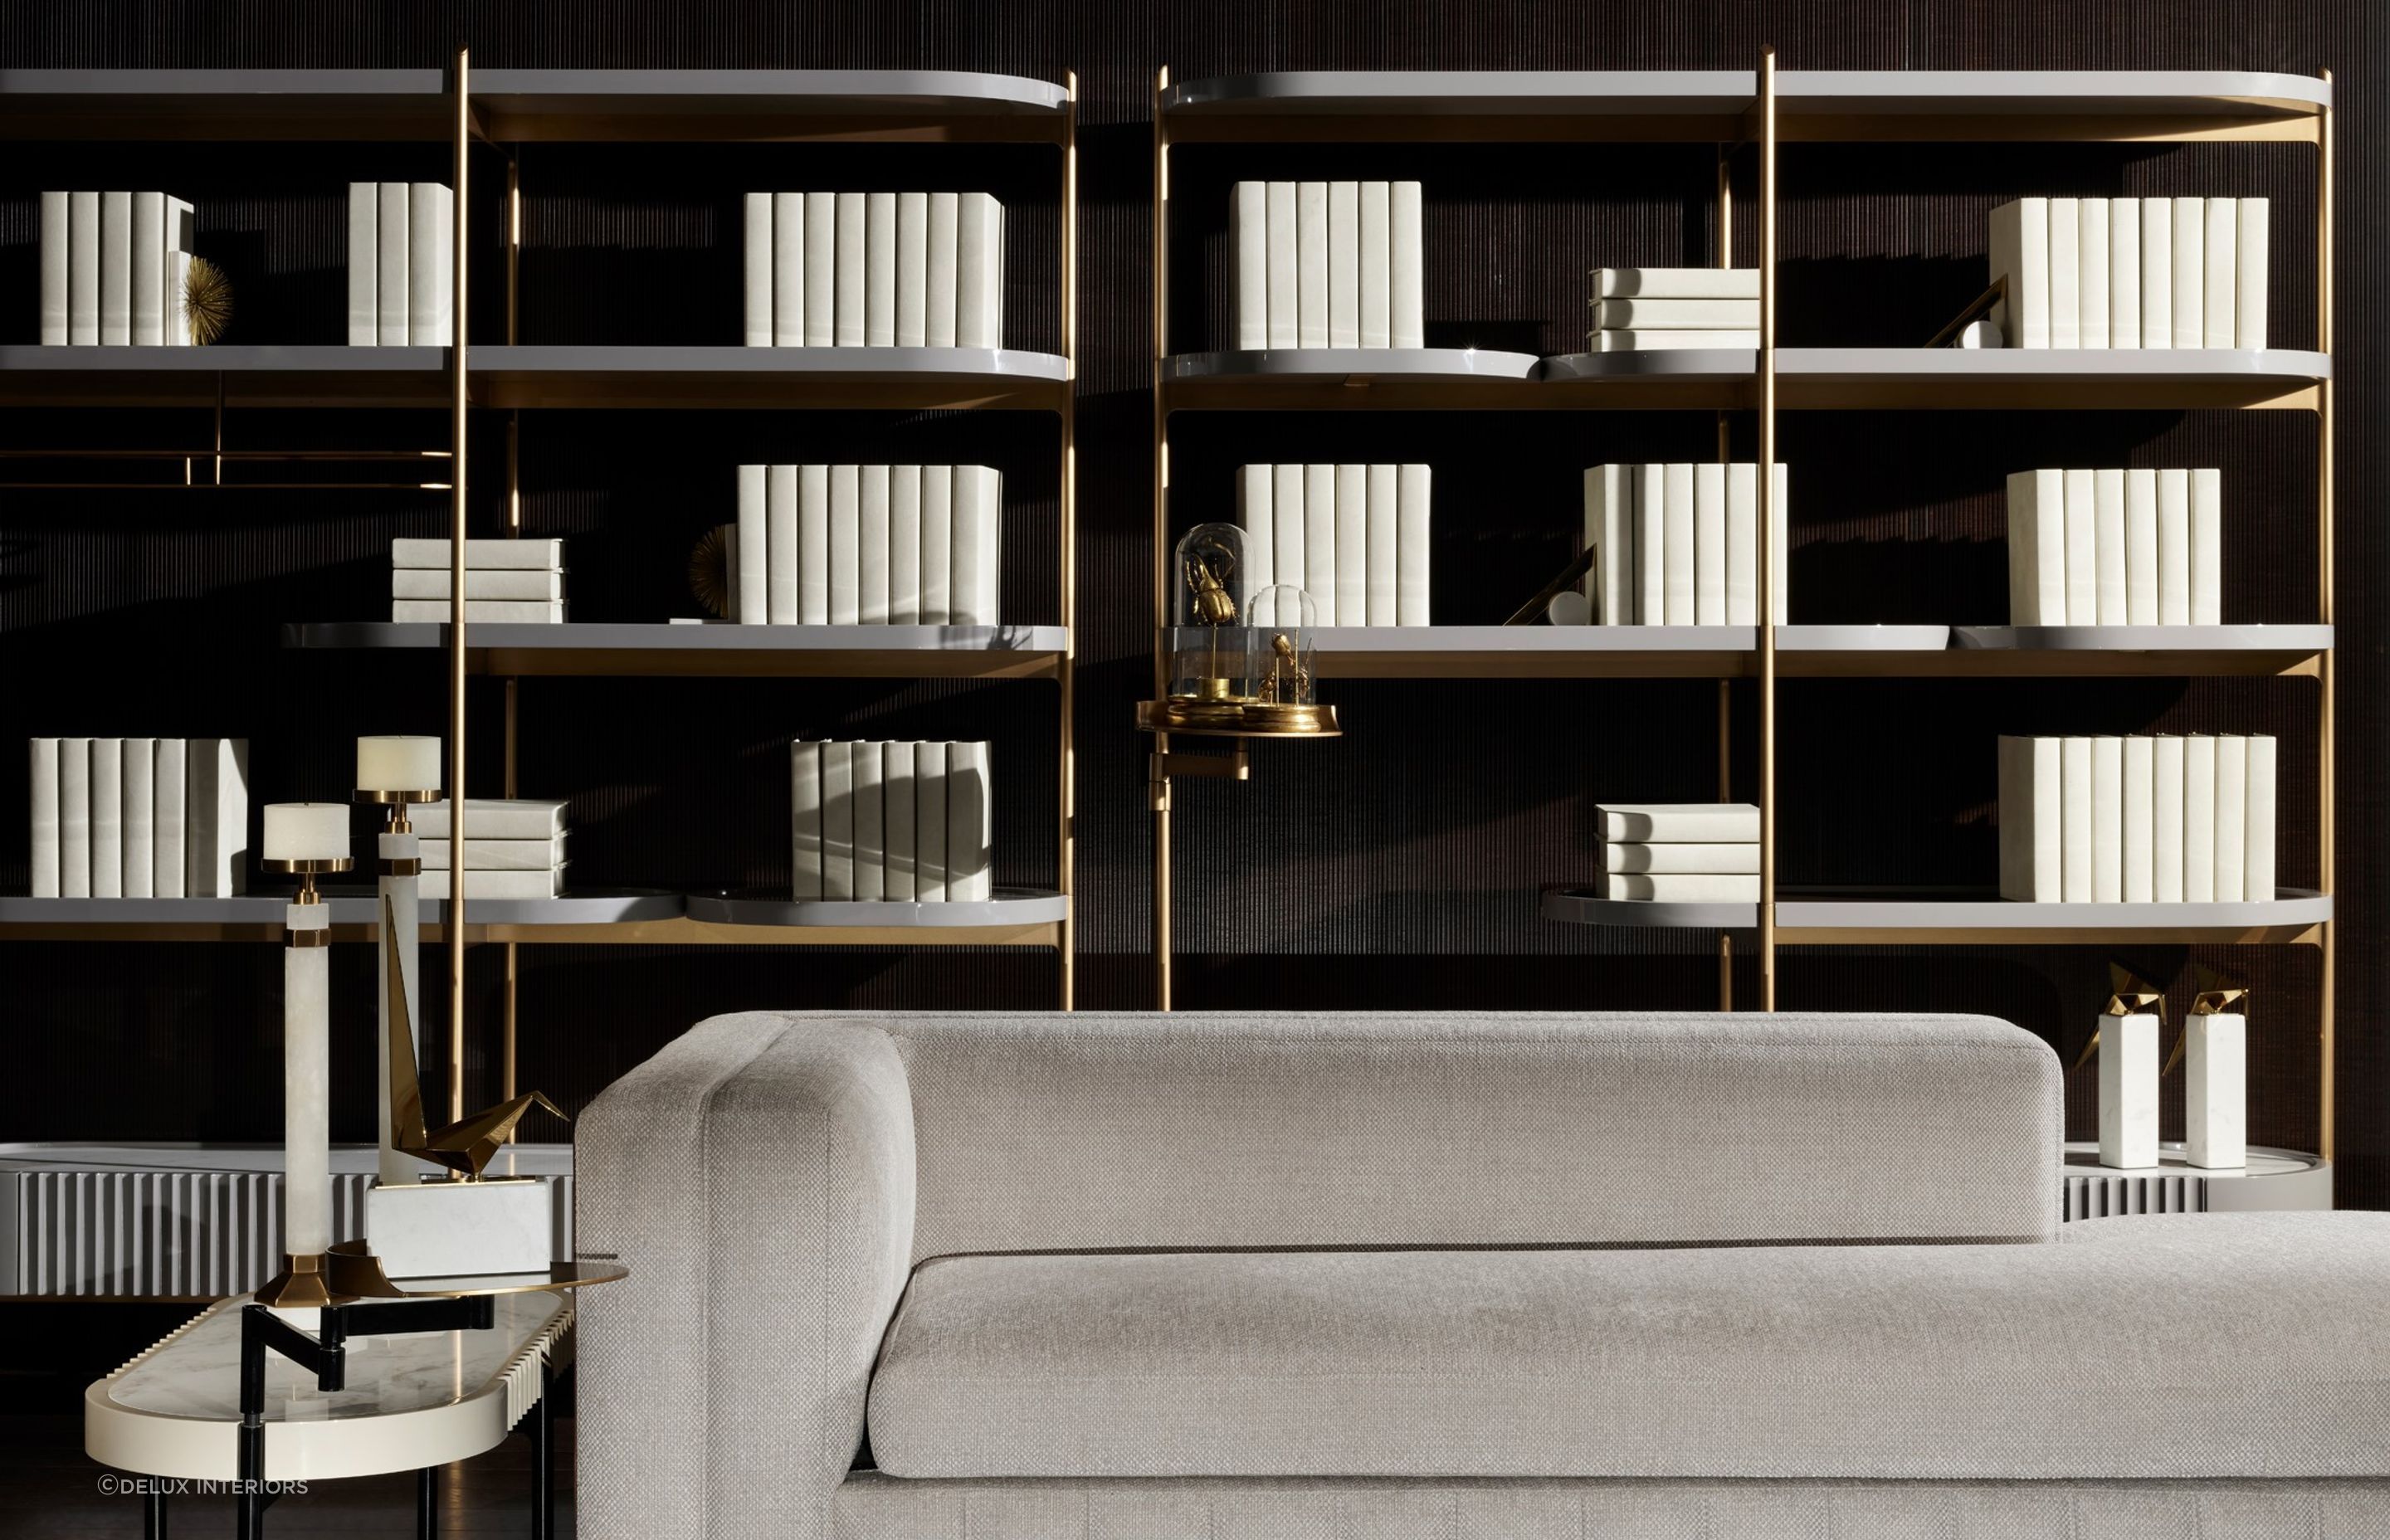 The exquisite Avenue Wall Unit is perfectly matched to the interior styling in this space.